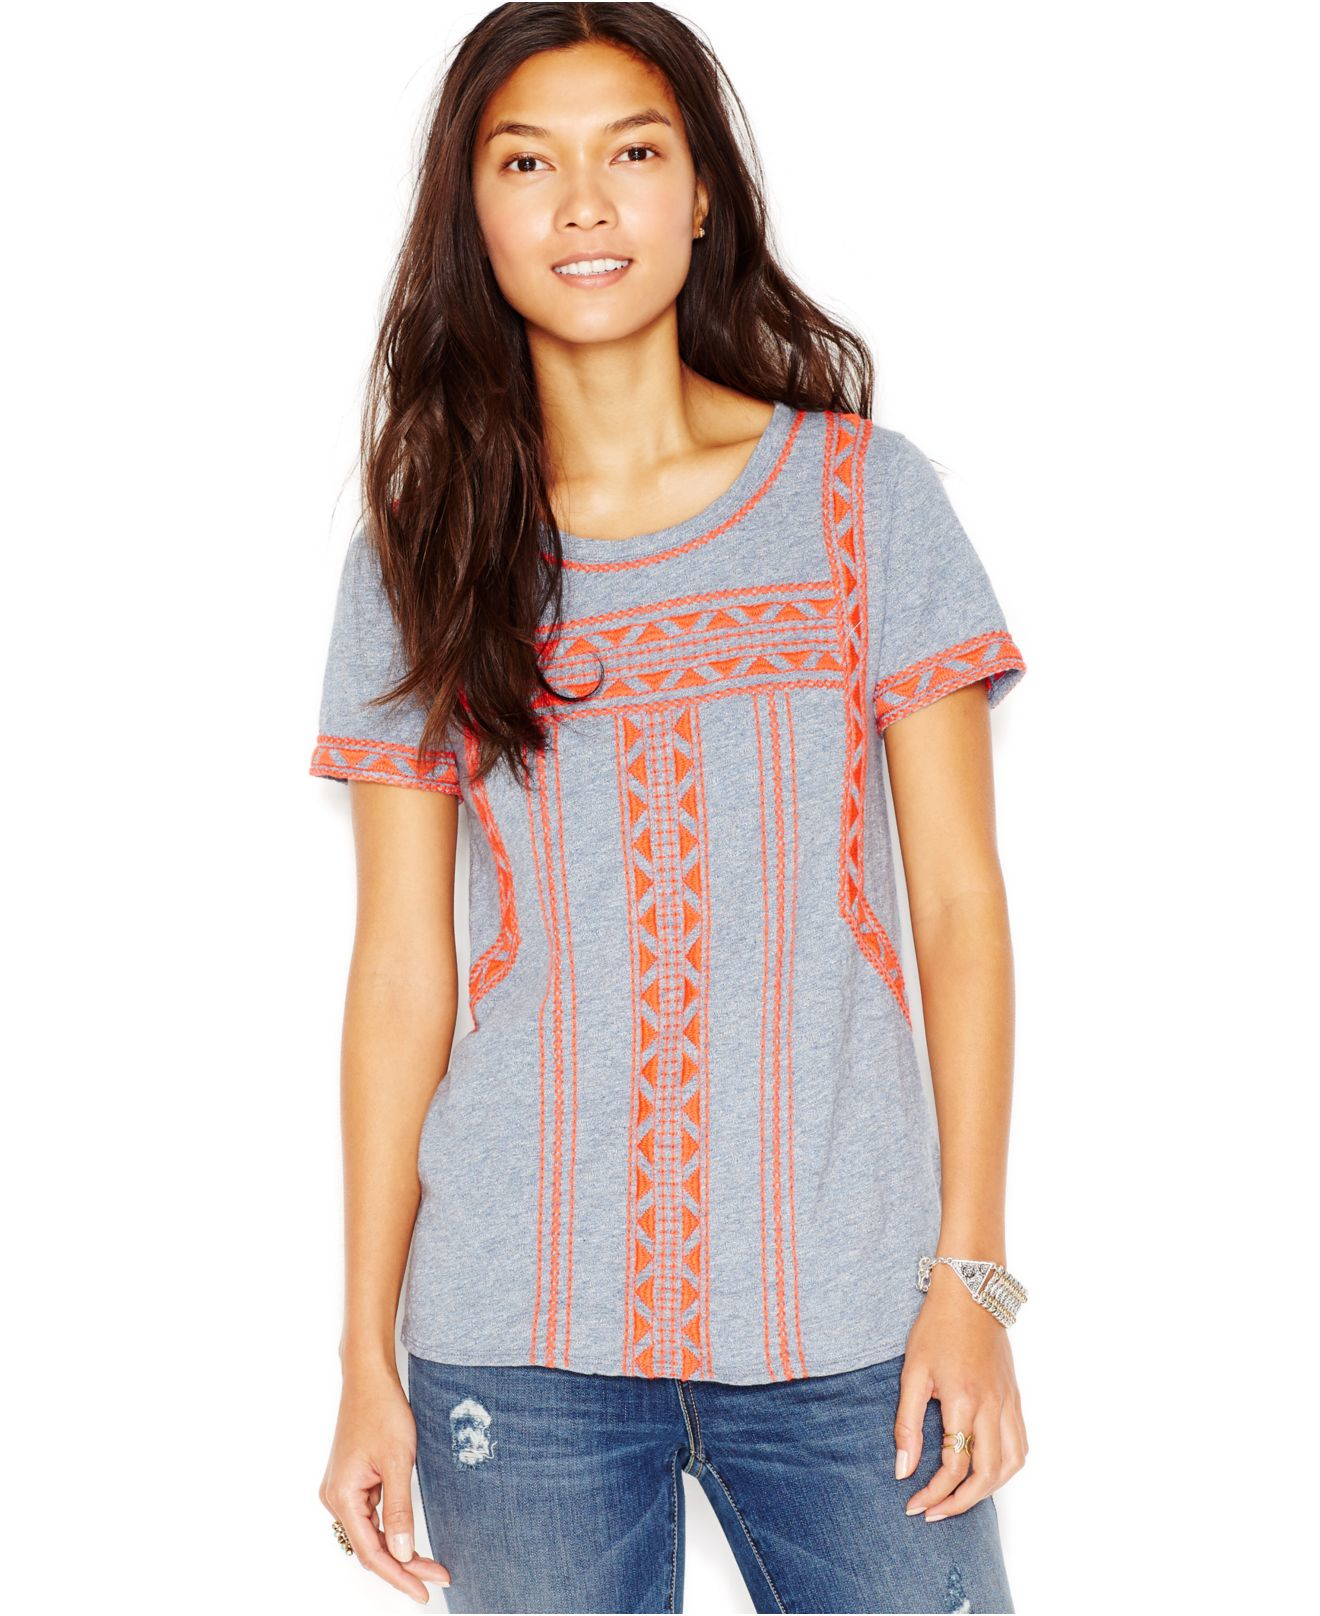 Lyst - Lucky brand Lucky Brand Short-sleeve Embroidered T-shirt in Blue